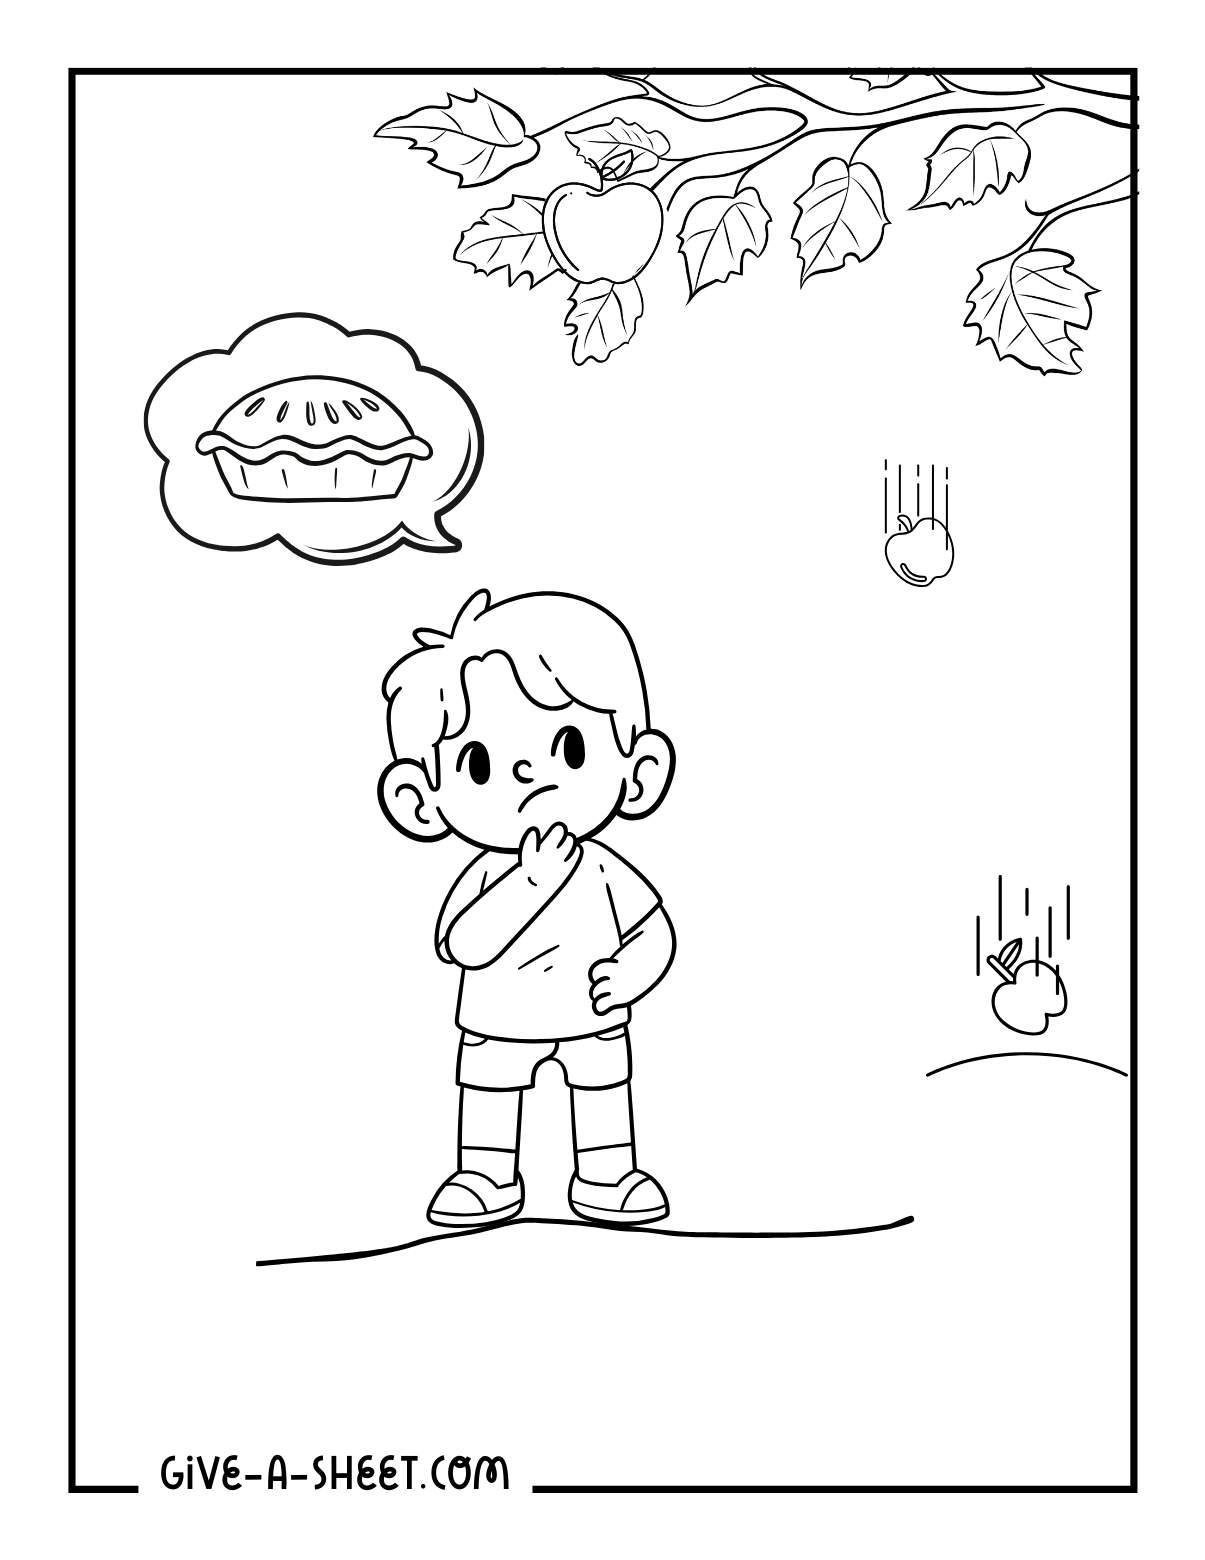 Apple pie delicious snack coloring page for kids.